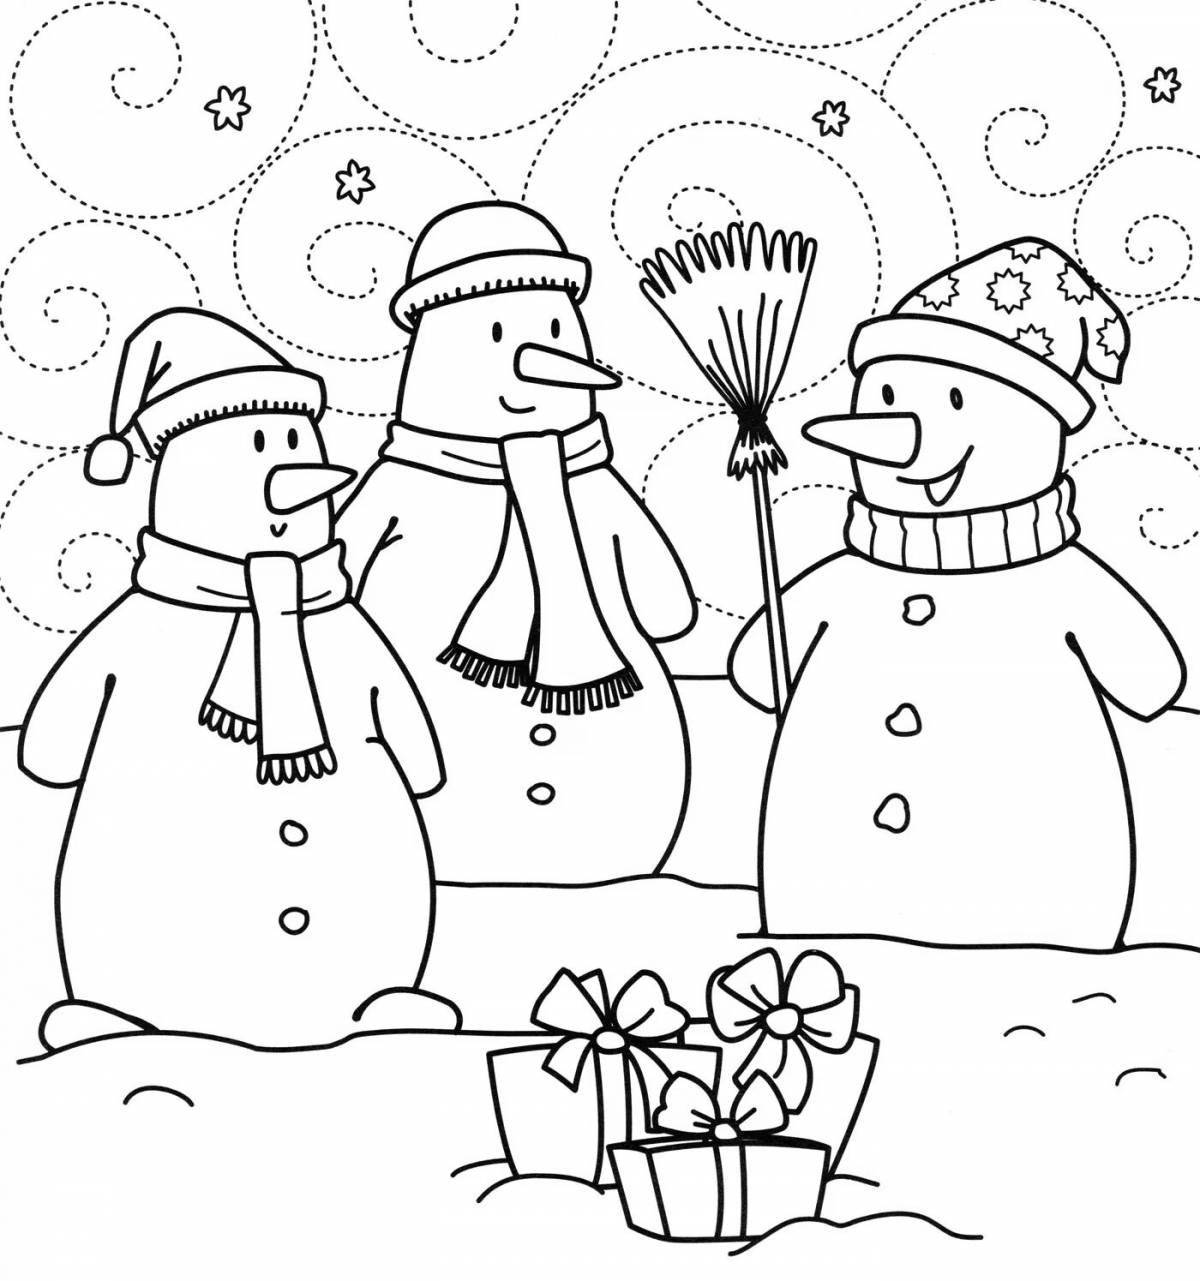 Coloring funny snowman day